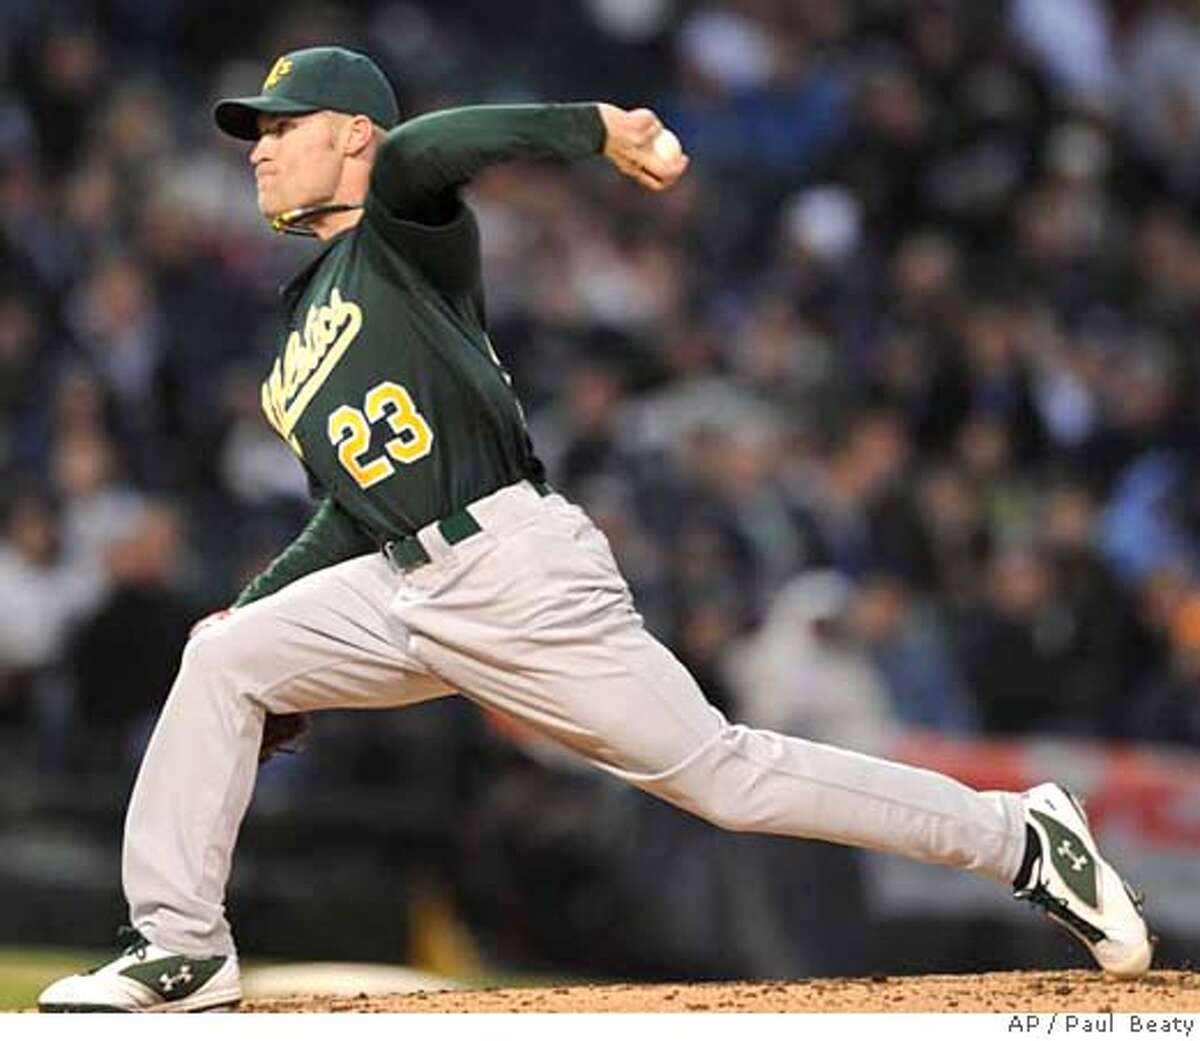 ###Live Caption:Oakland Athletics' pitcher Greg Smith throws against the Chicago White Sox in a baseball game in Chicago Monday, April 14, 2008. (AP Photo/Paul Beaty)###Caption History:Oakland Athletics' pitcher Greg Smith throws against the Chicago White Sox in a baseball game in Chicago Monday, April 14, 2008. (AP Photo/Paul Beaty)###Notes:Greg Smith###Special Instructions:EFE OUT